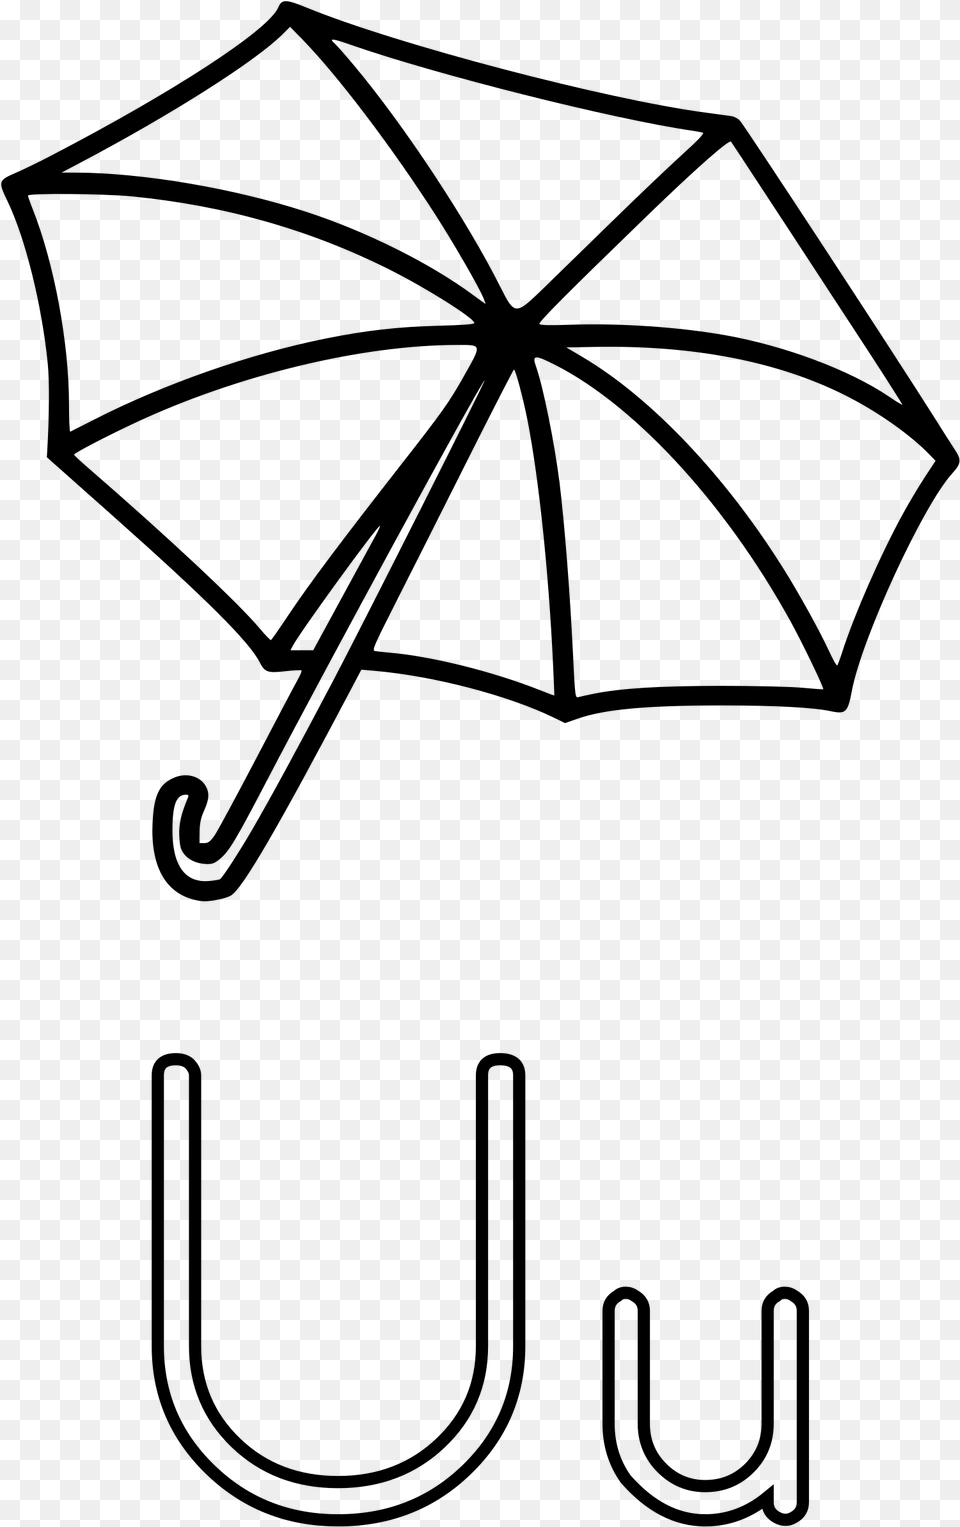 Umbrella Black And White Clipart 1 U Is For Umbrella Worksheet, Gray Png Image